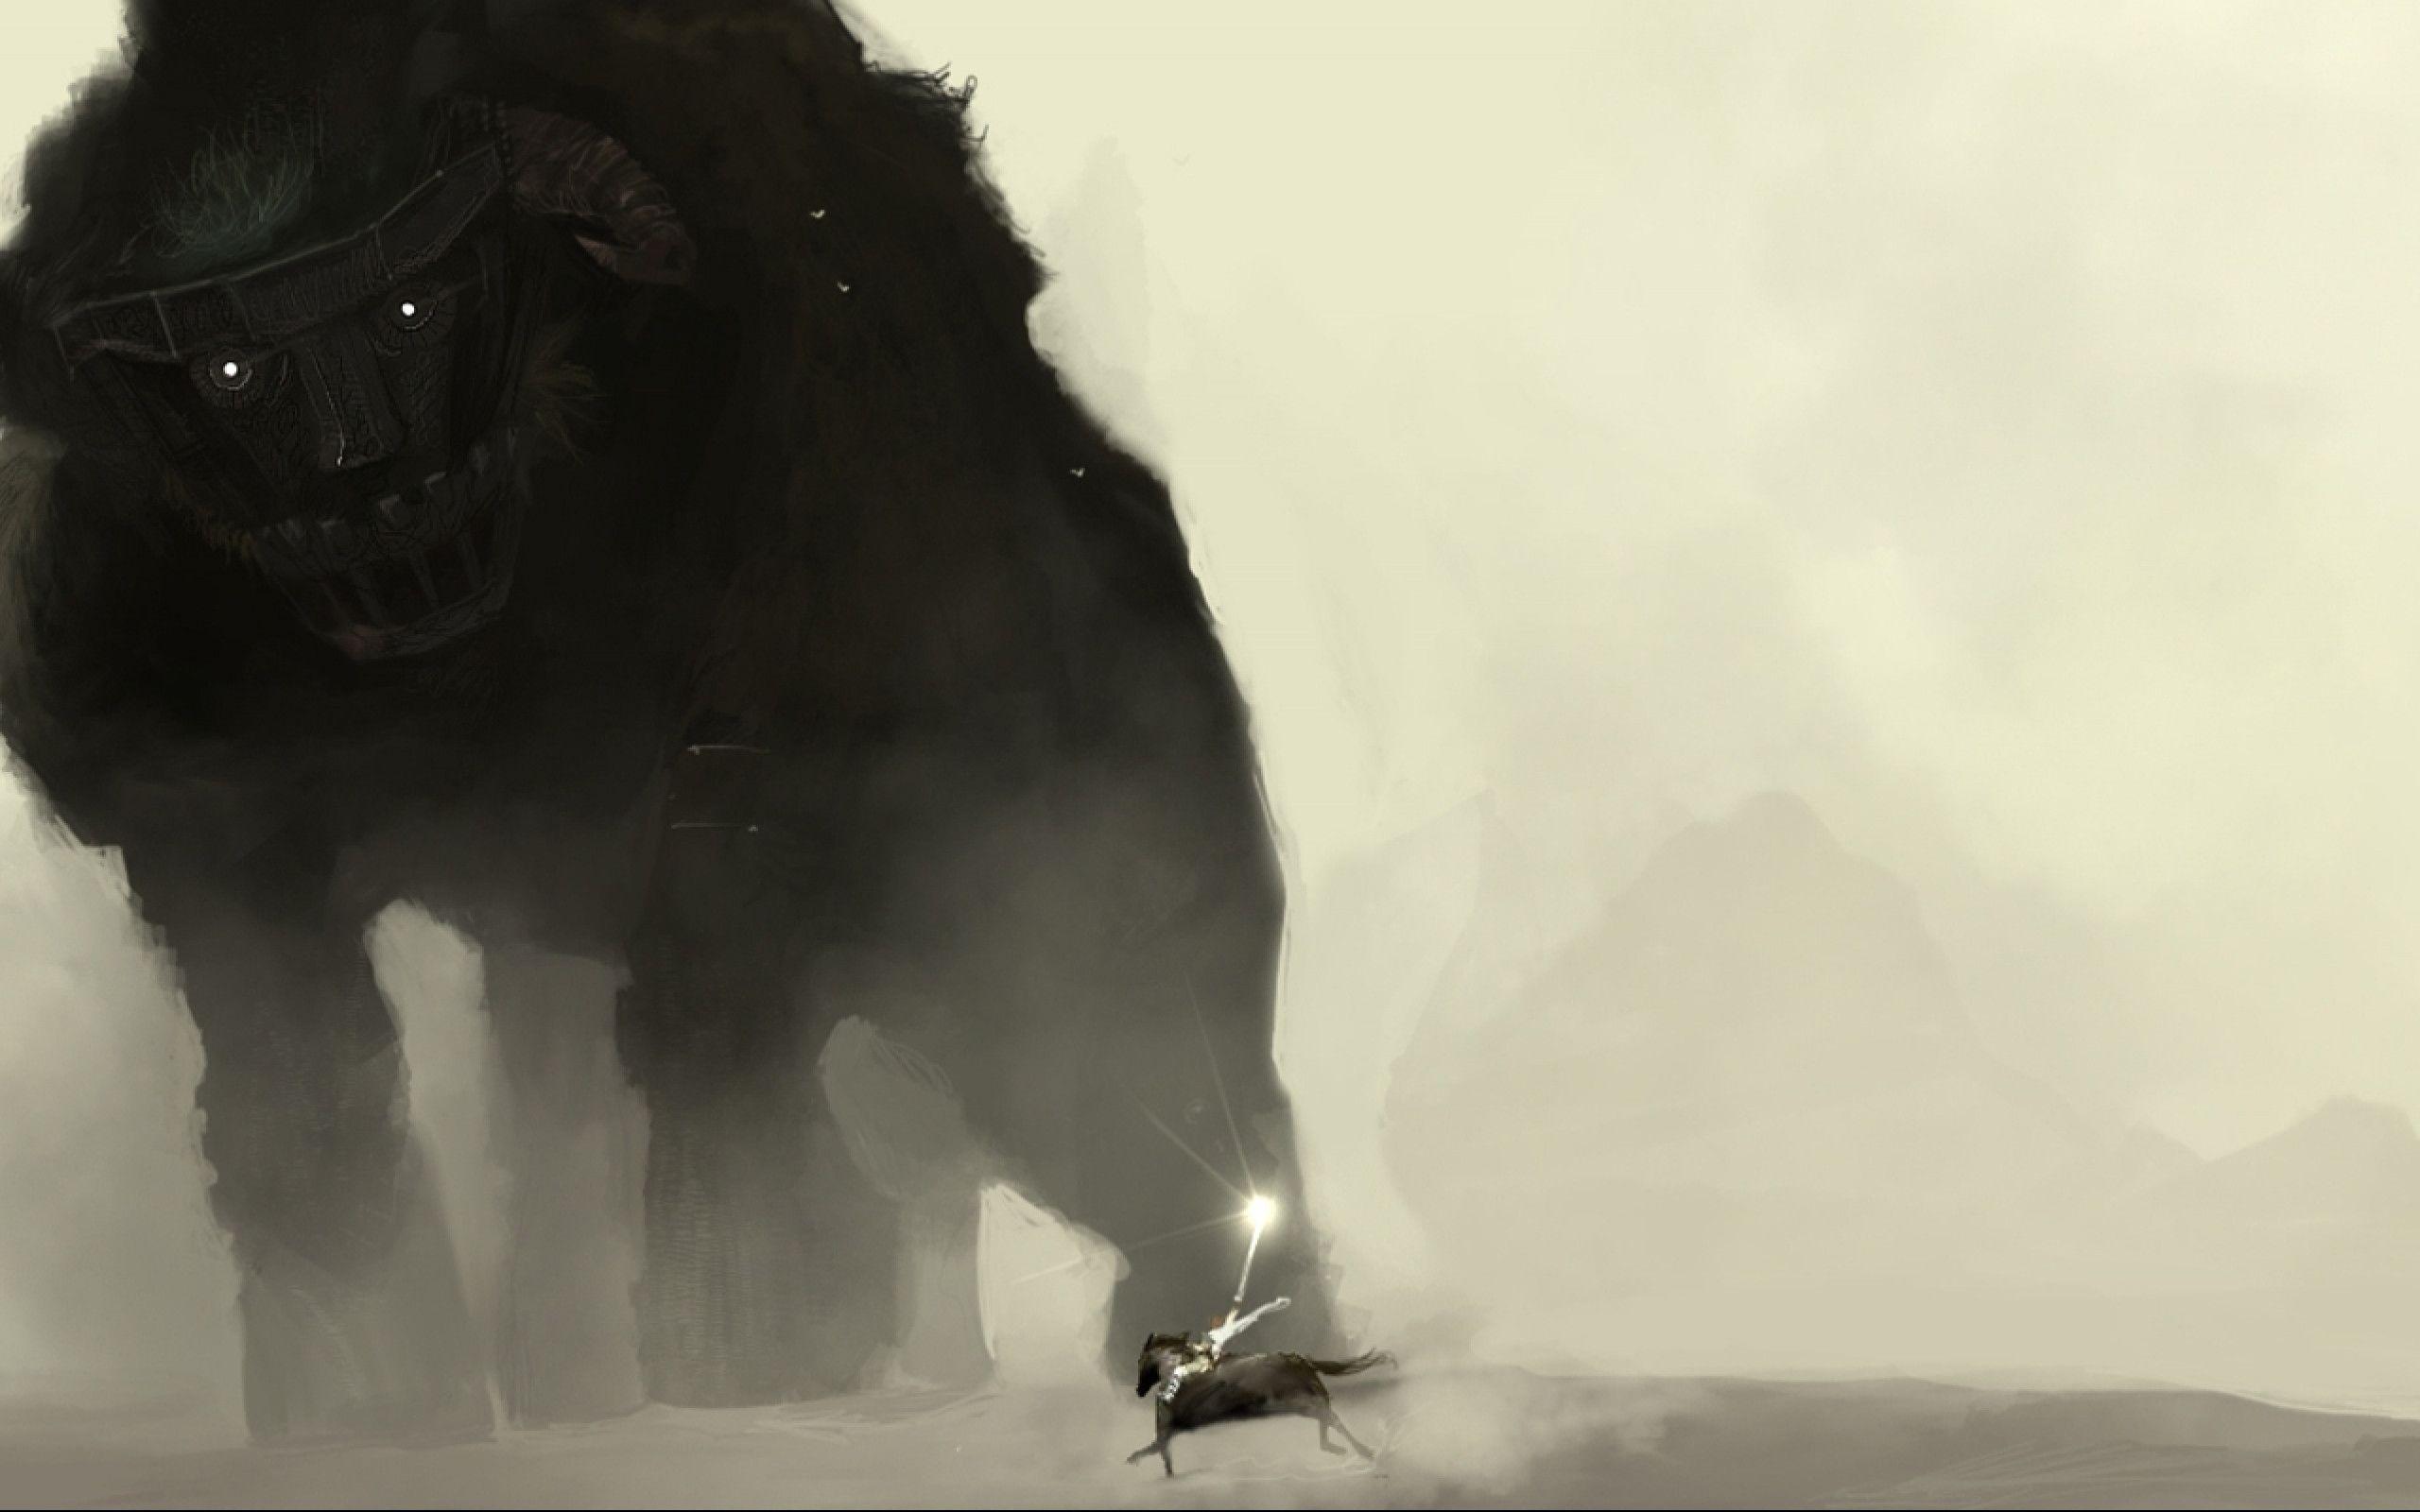 Best image about Ico & Shadow of the Colossus